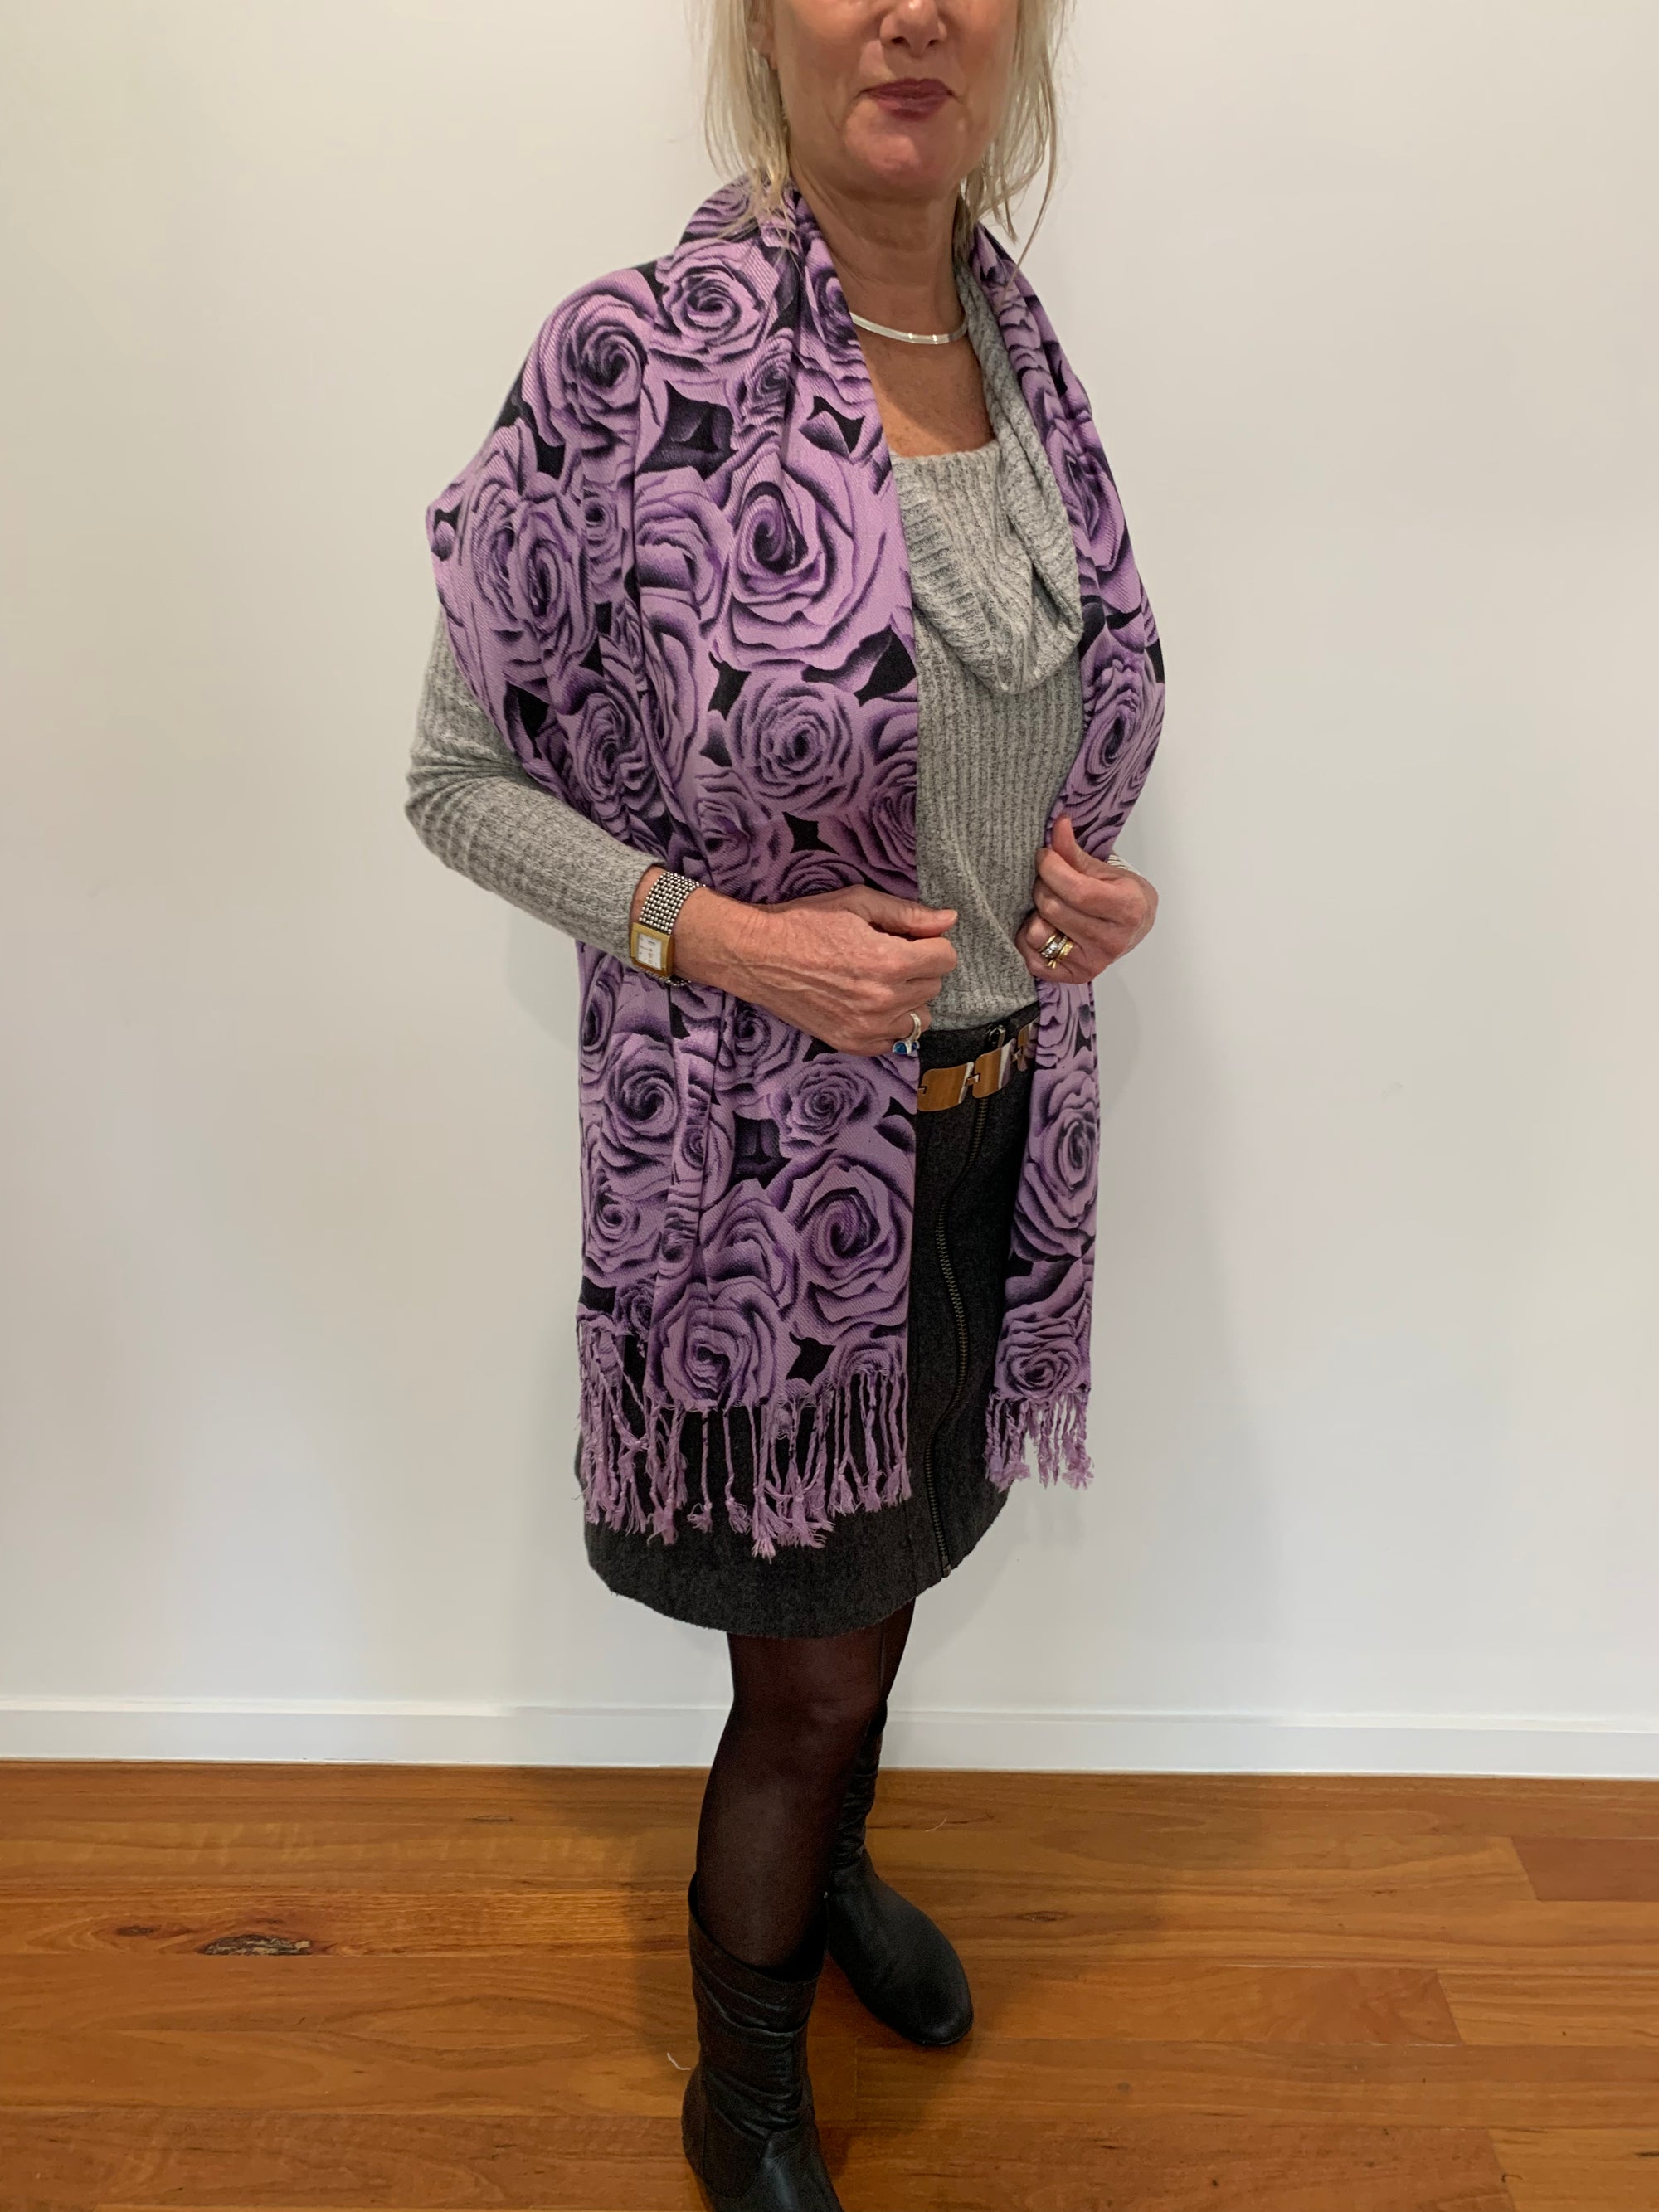 Rose Pattern Scarf in Black and Purple Oversized Scarf